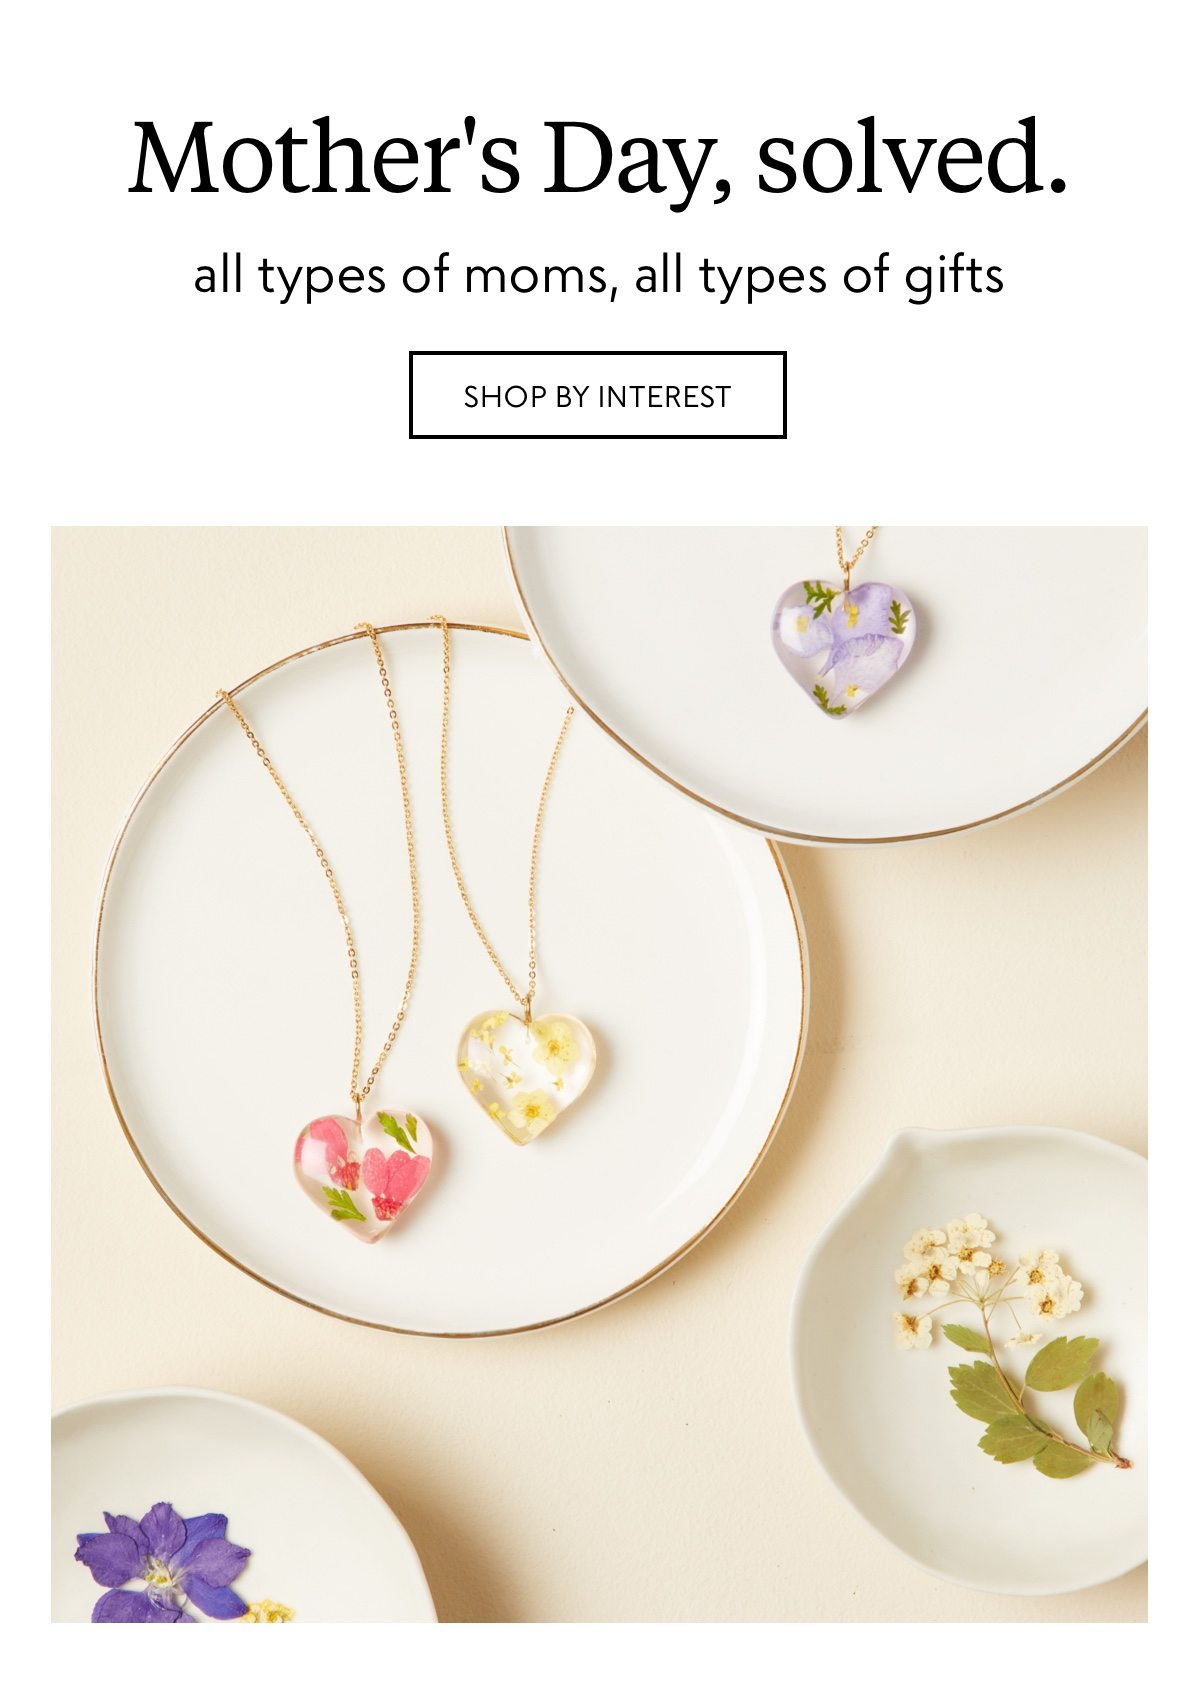 Mother's Day, solved. All types of moms, all types of gifts. Shop by interest